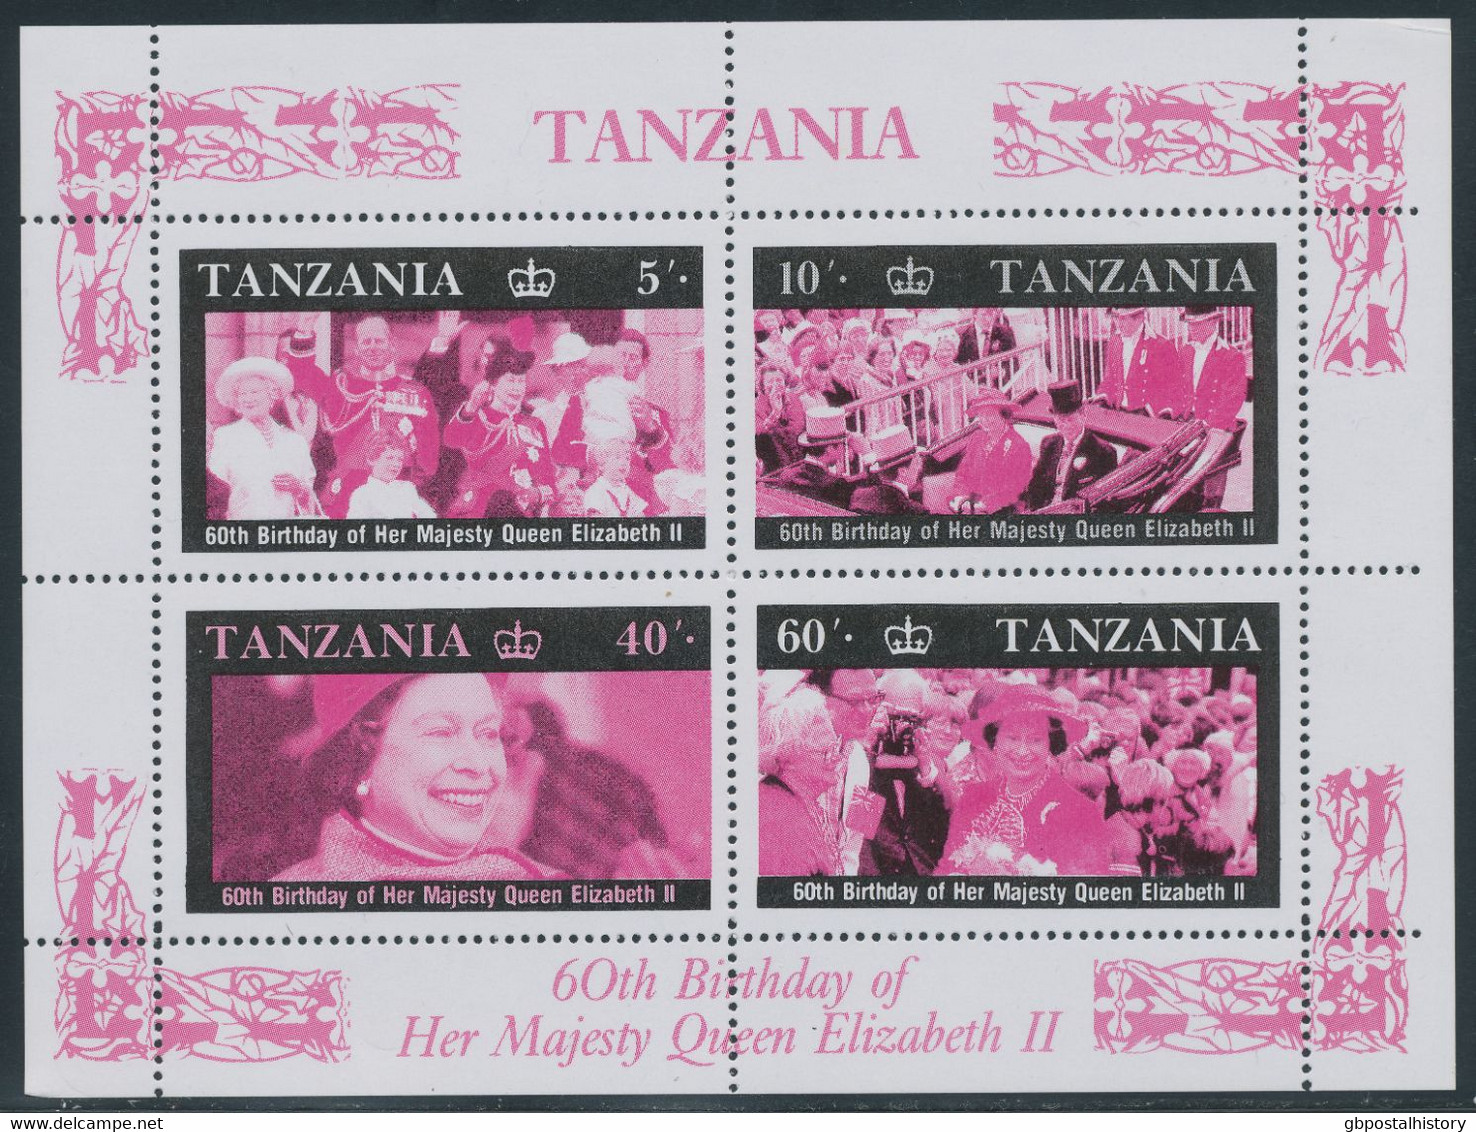 TANZANIA 1987, 60th Birthday Of Queen Elizabeth II, MAJOR VARIETY: Superb U/M MS With MISSING COLORS Yellow And Blue, - Tansania (1964-...)